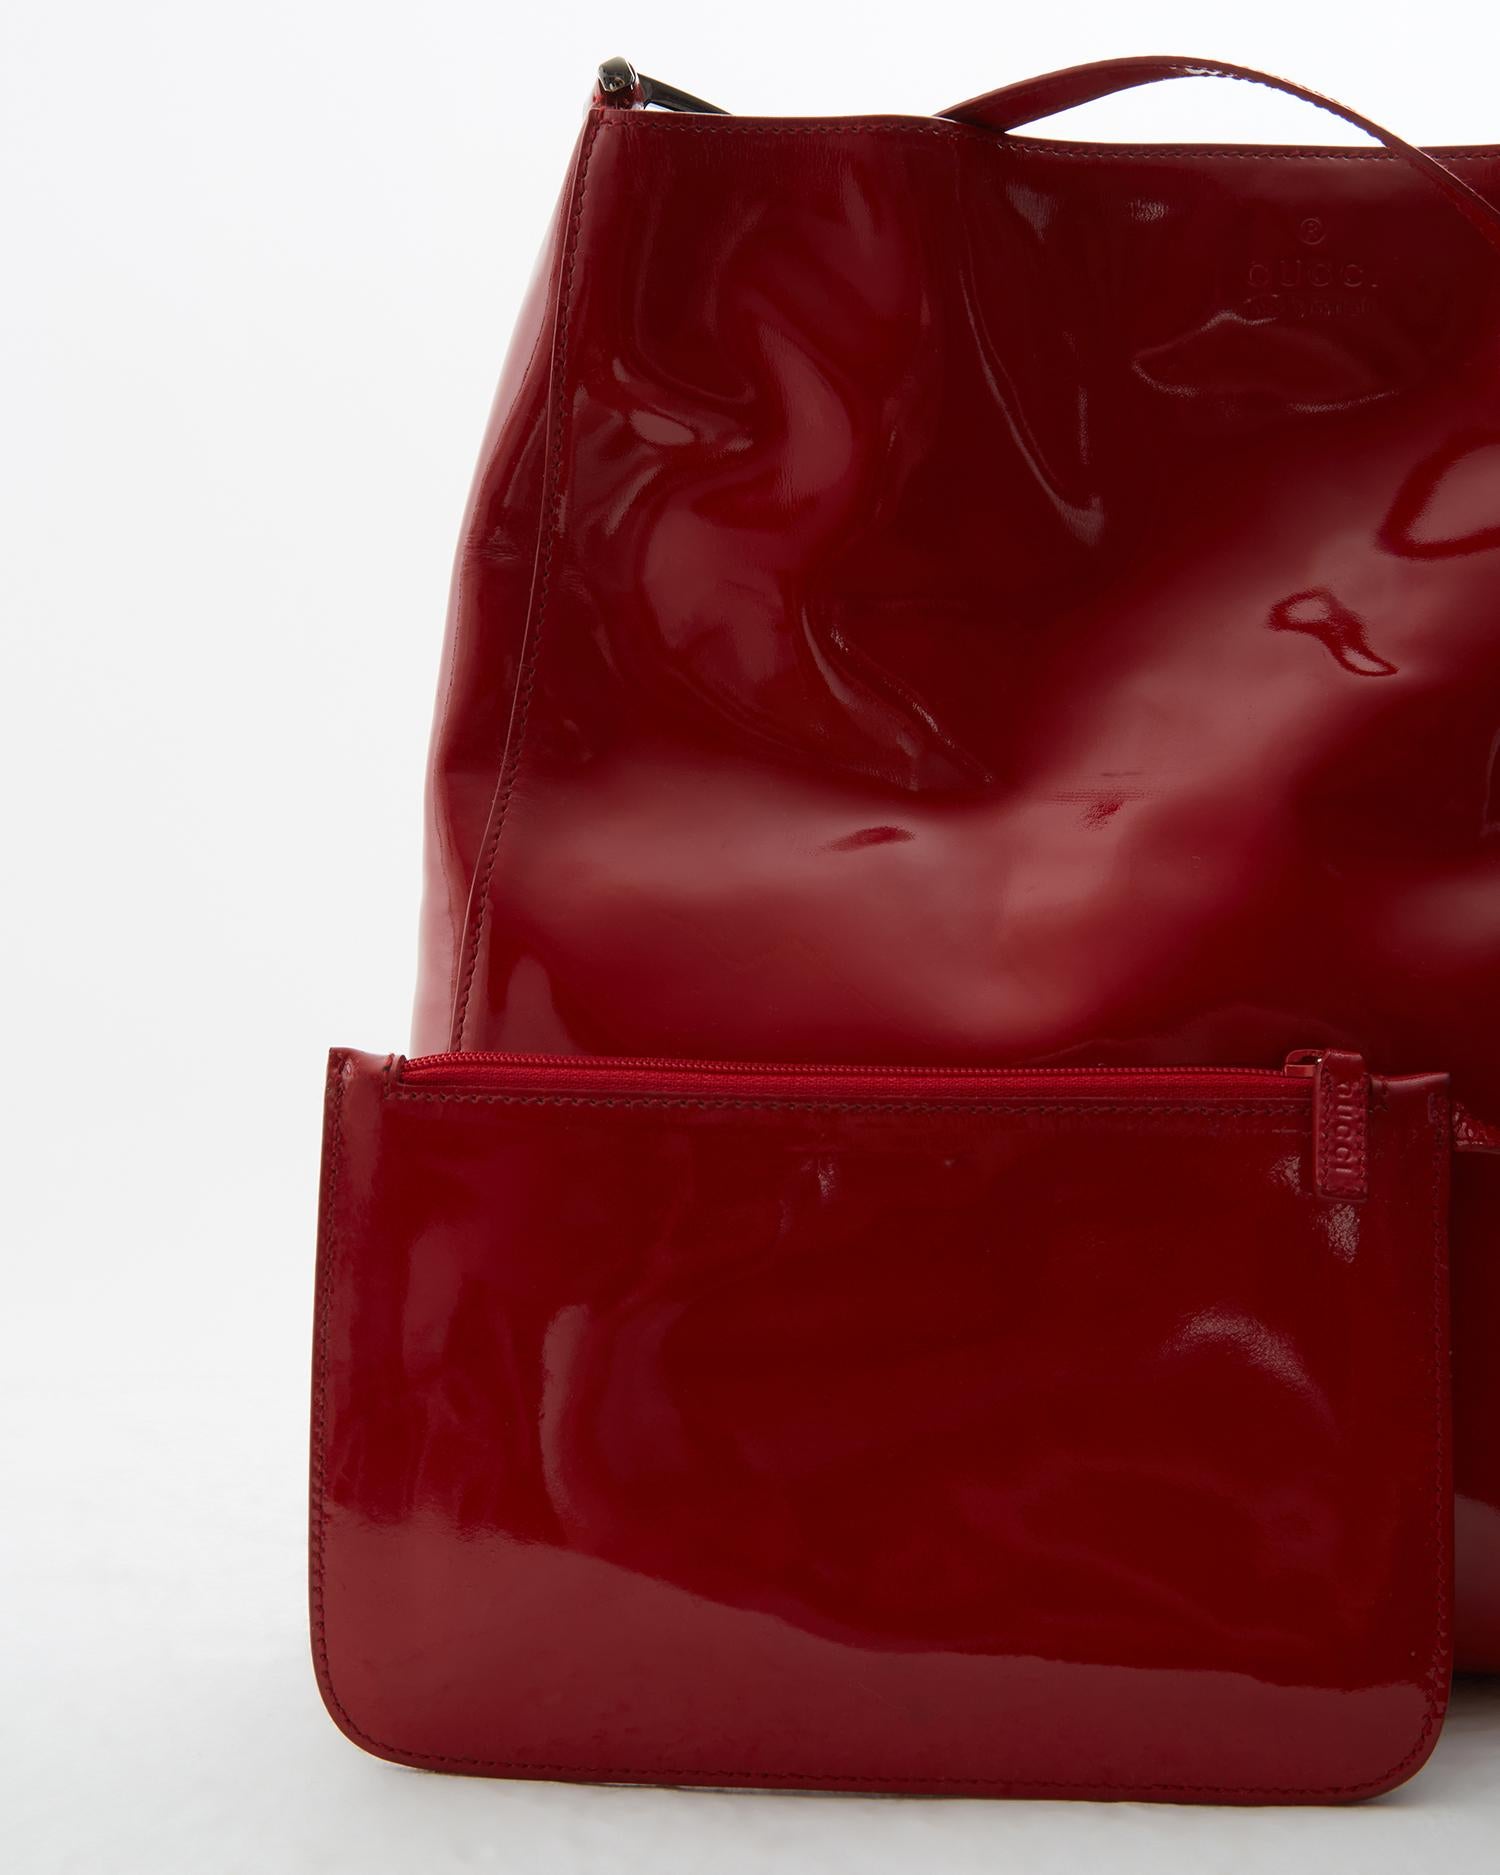 Gucci by Tom Ford red patent leather metal ring shoulder bag, fw 1997  5